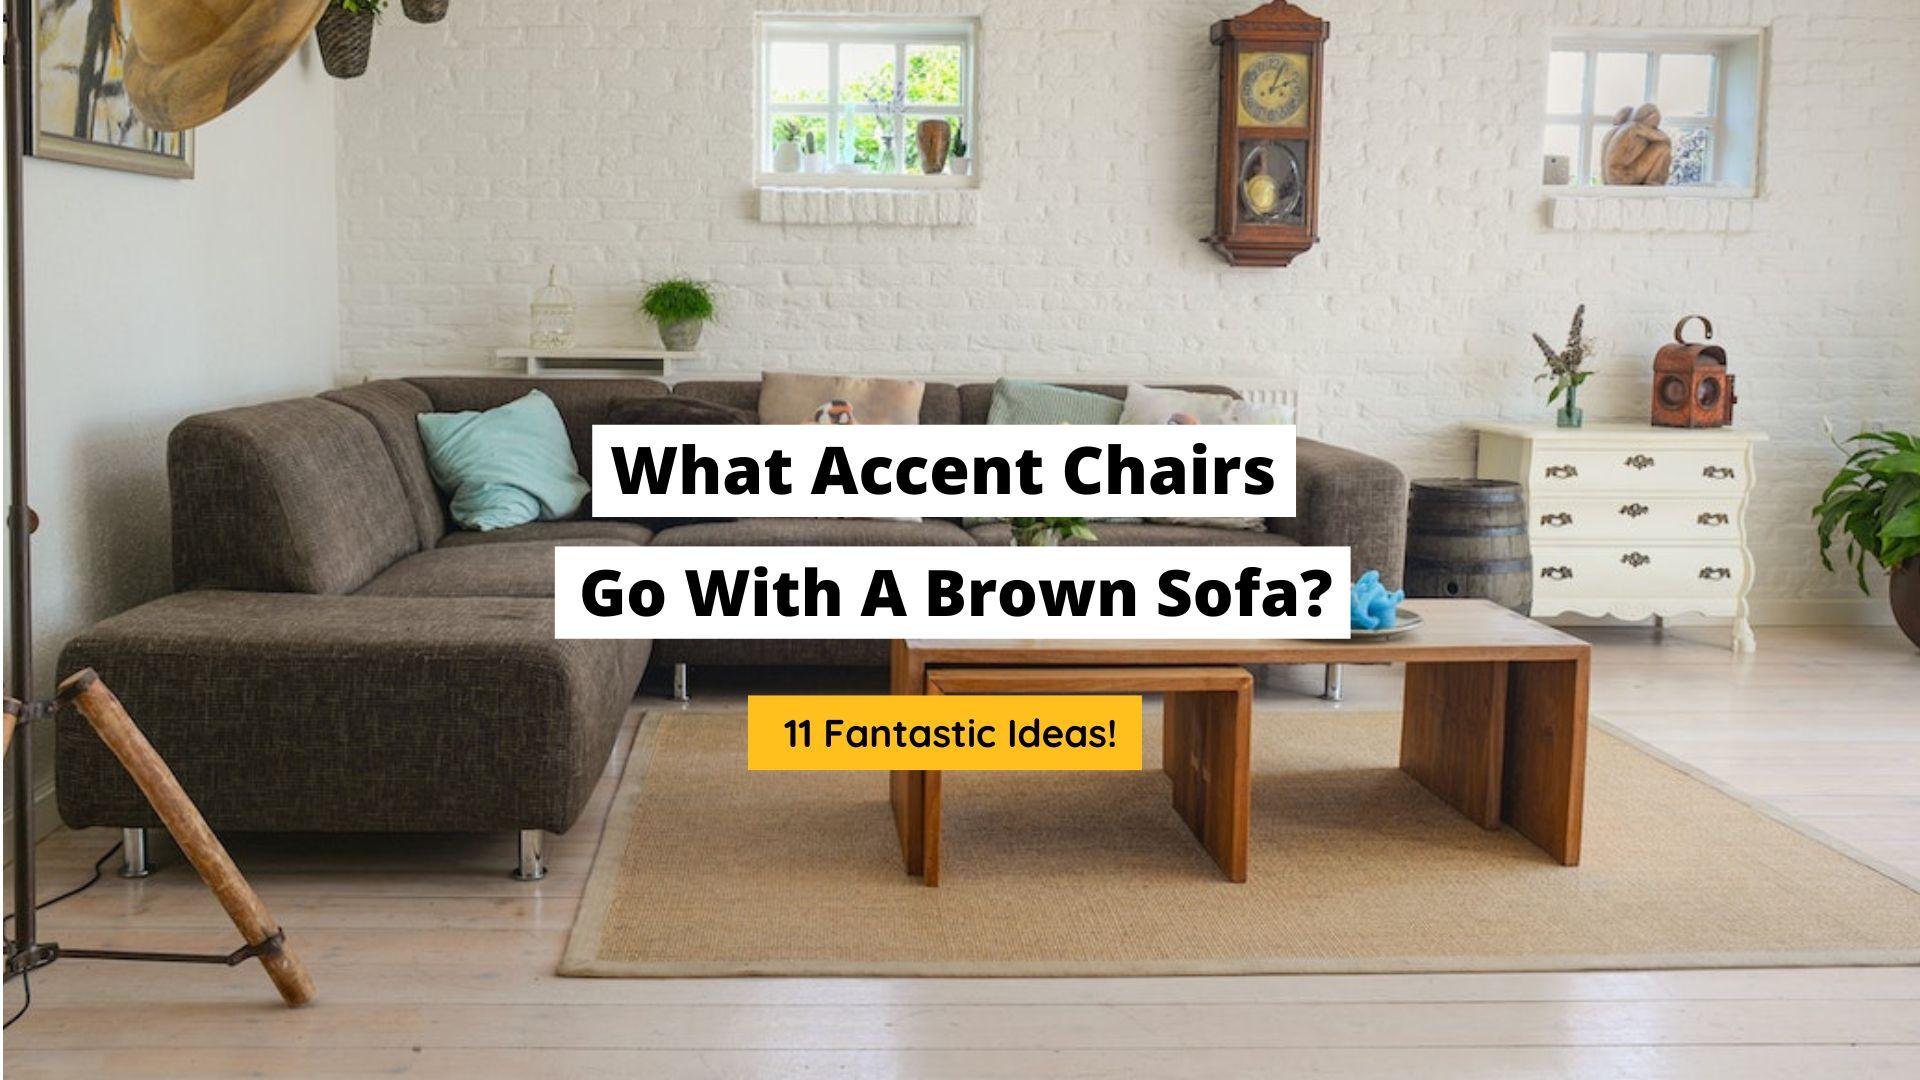 What Accent Chairs Go with Brown Sofa